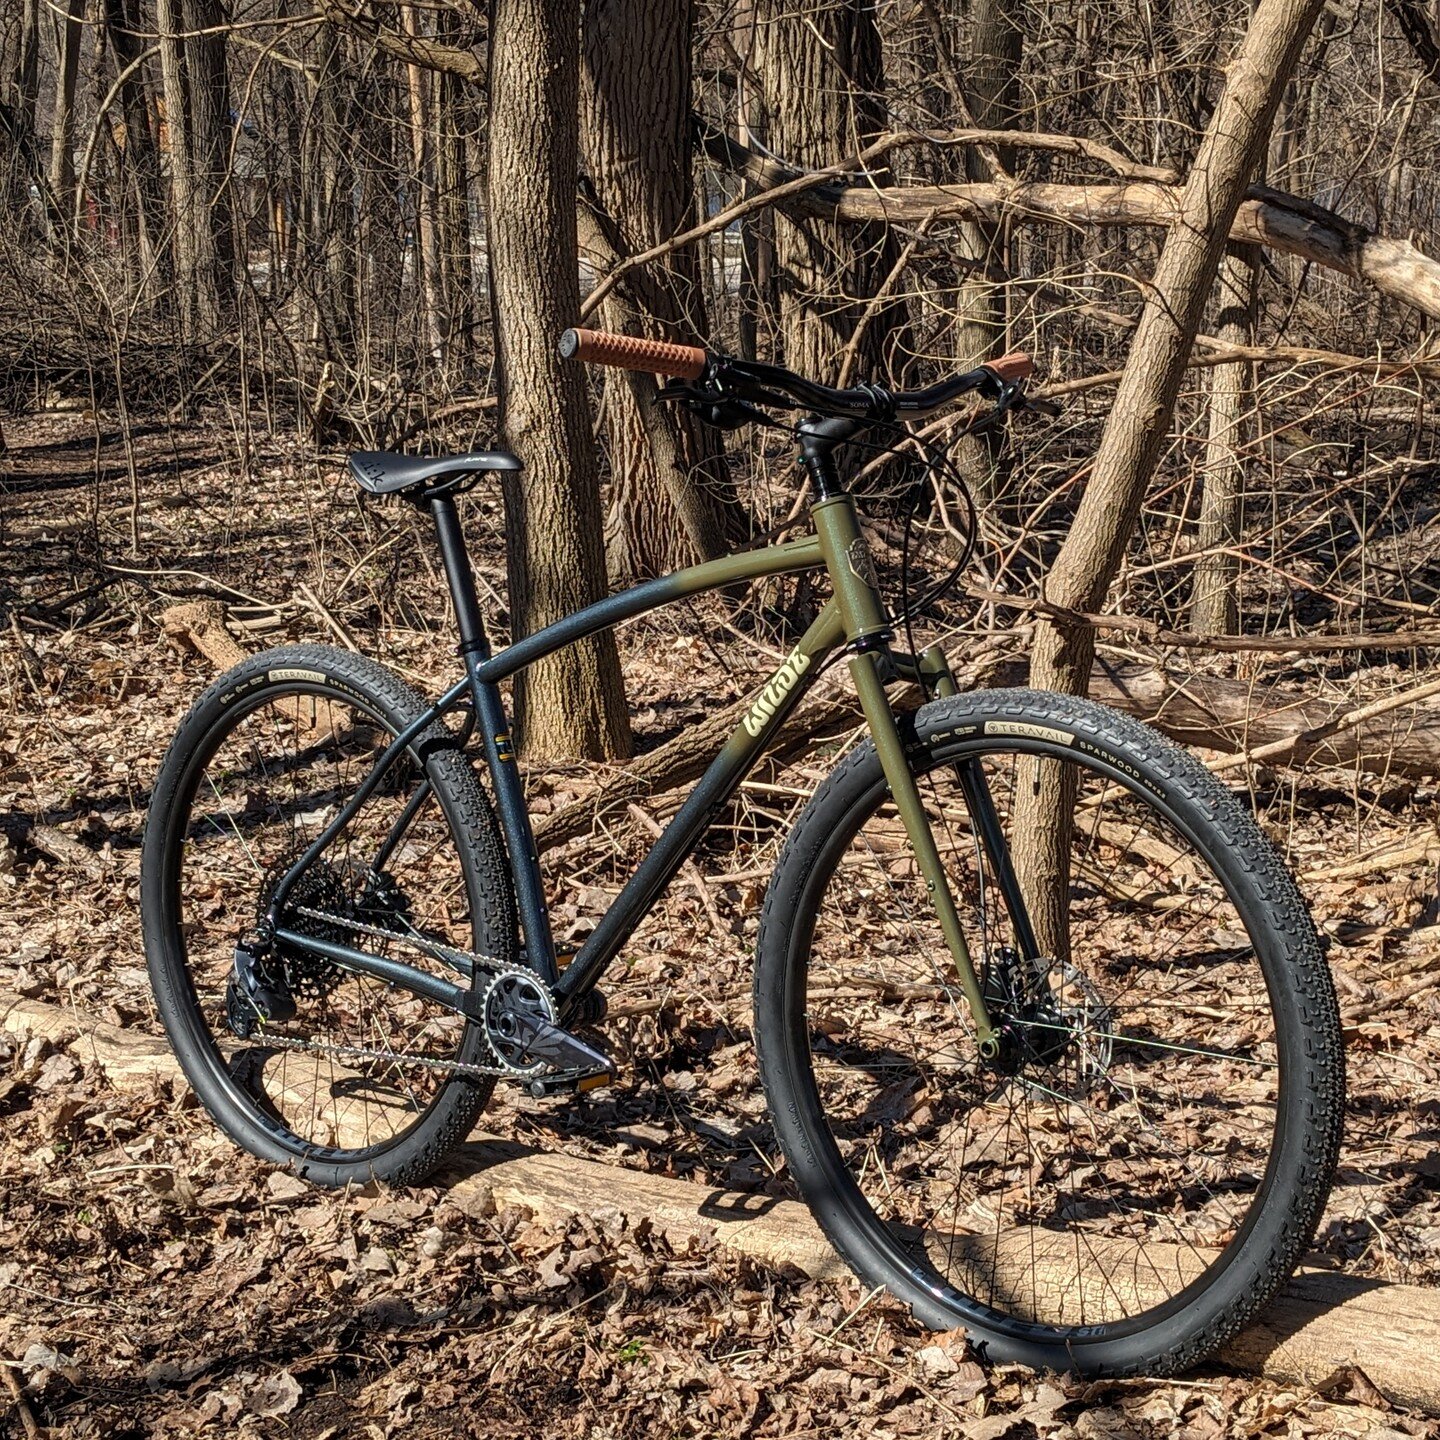 What bike would you choose if you could only have one? The Wilde Supertramp would be on our short list. 
Handmade in Taiwan, built up with sensible parts with all the mounts and tire clearance you could ever want. 
And did you seen that segmented ste